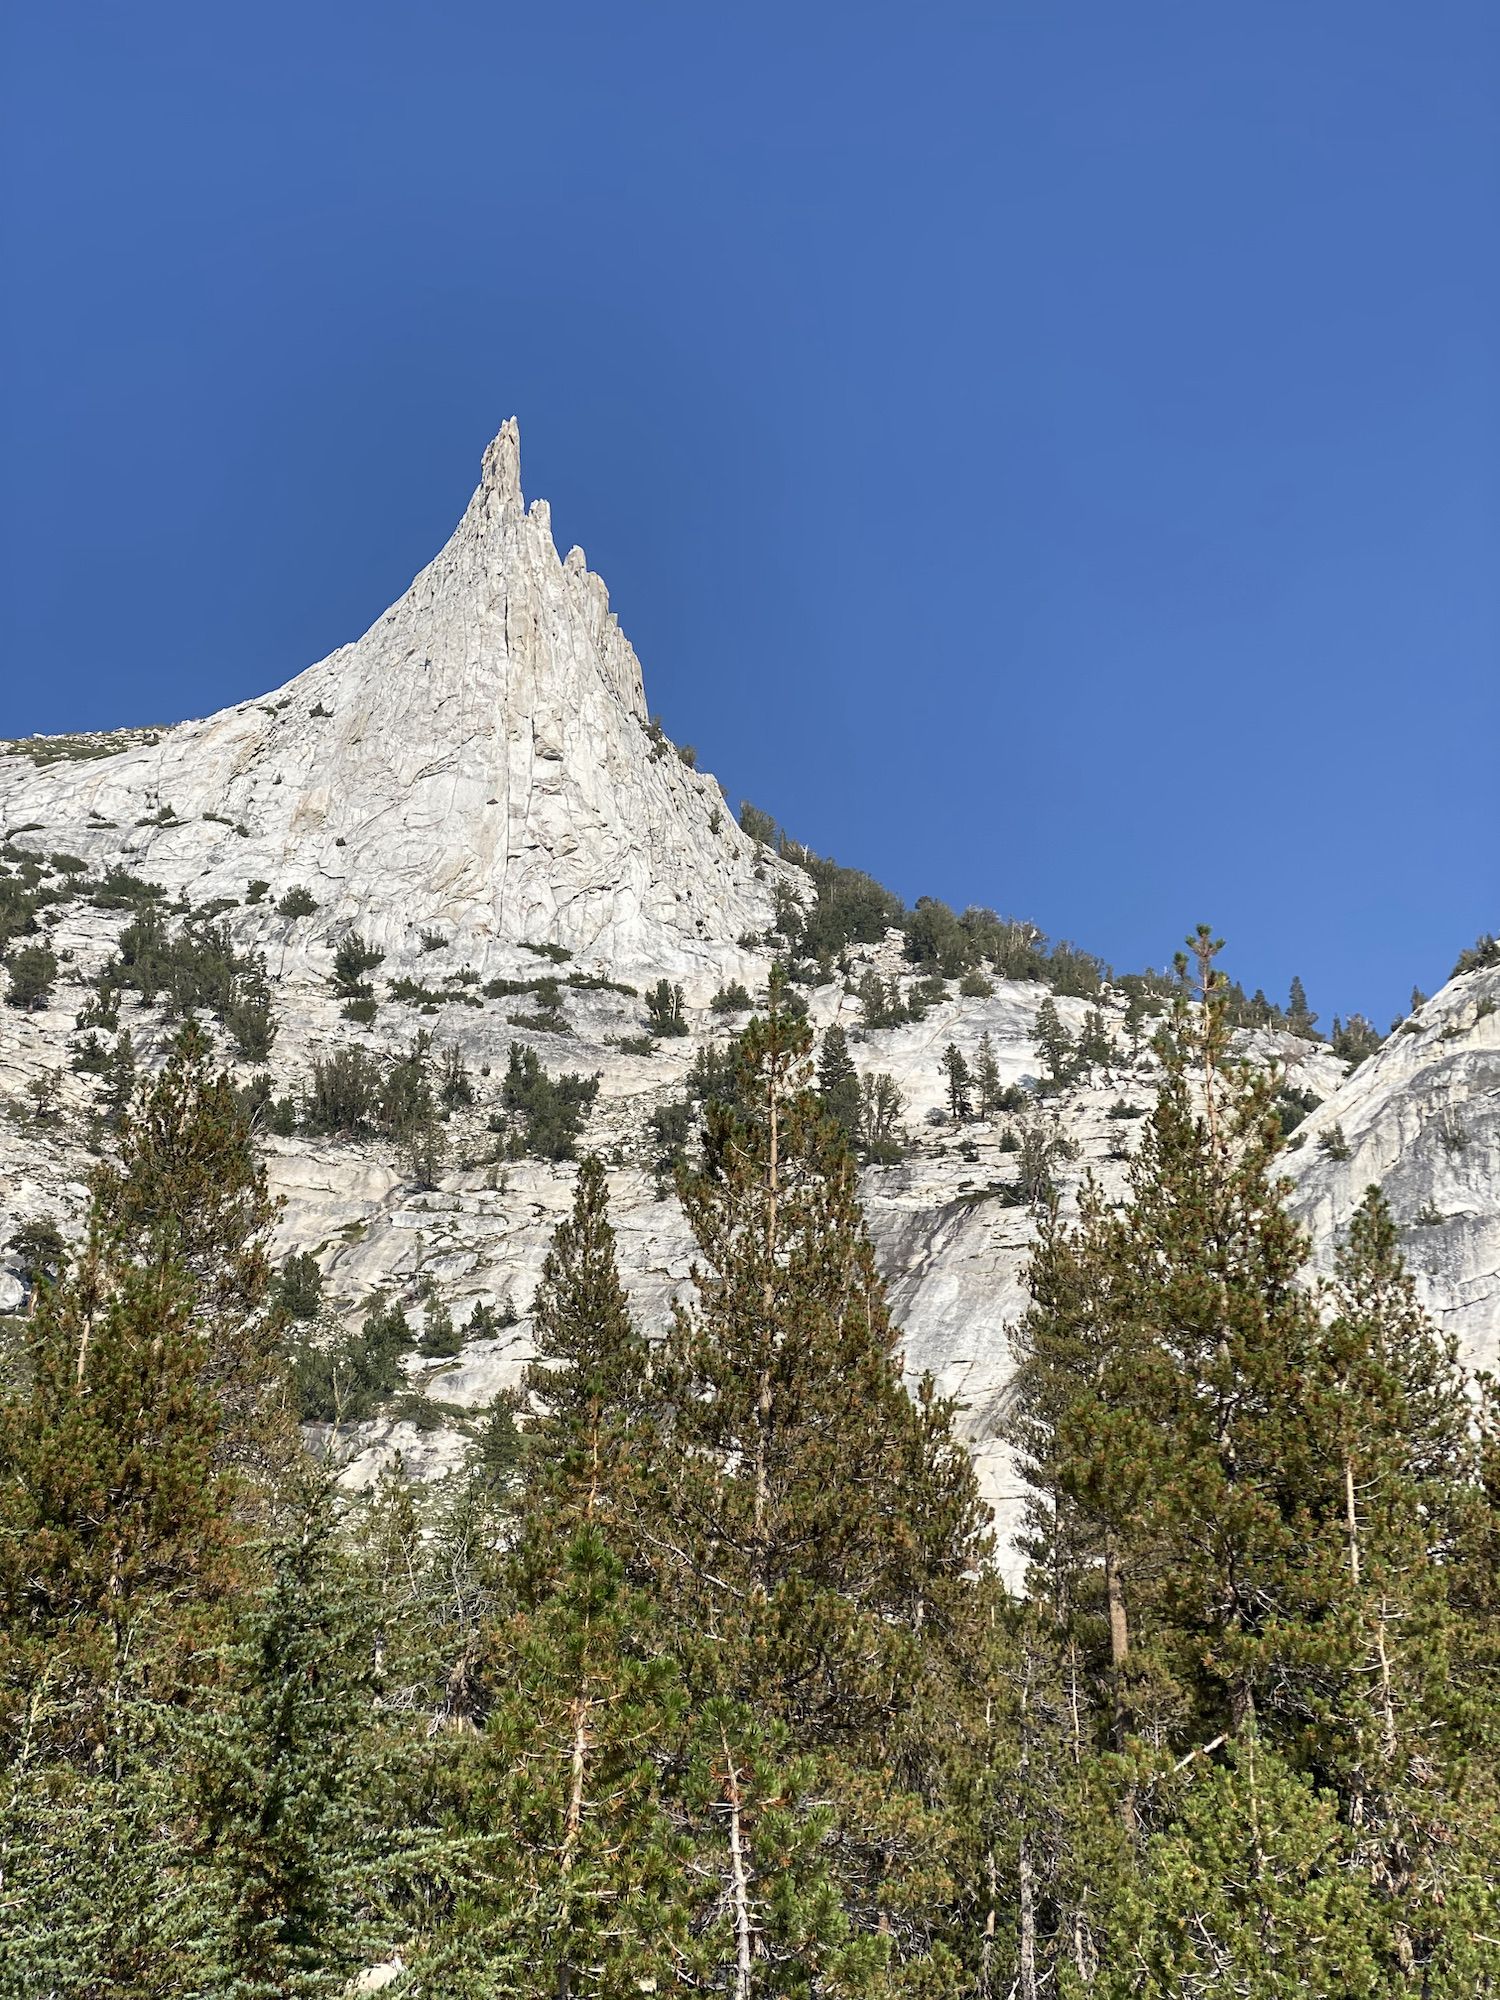 A sharply pointed mountain top.